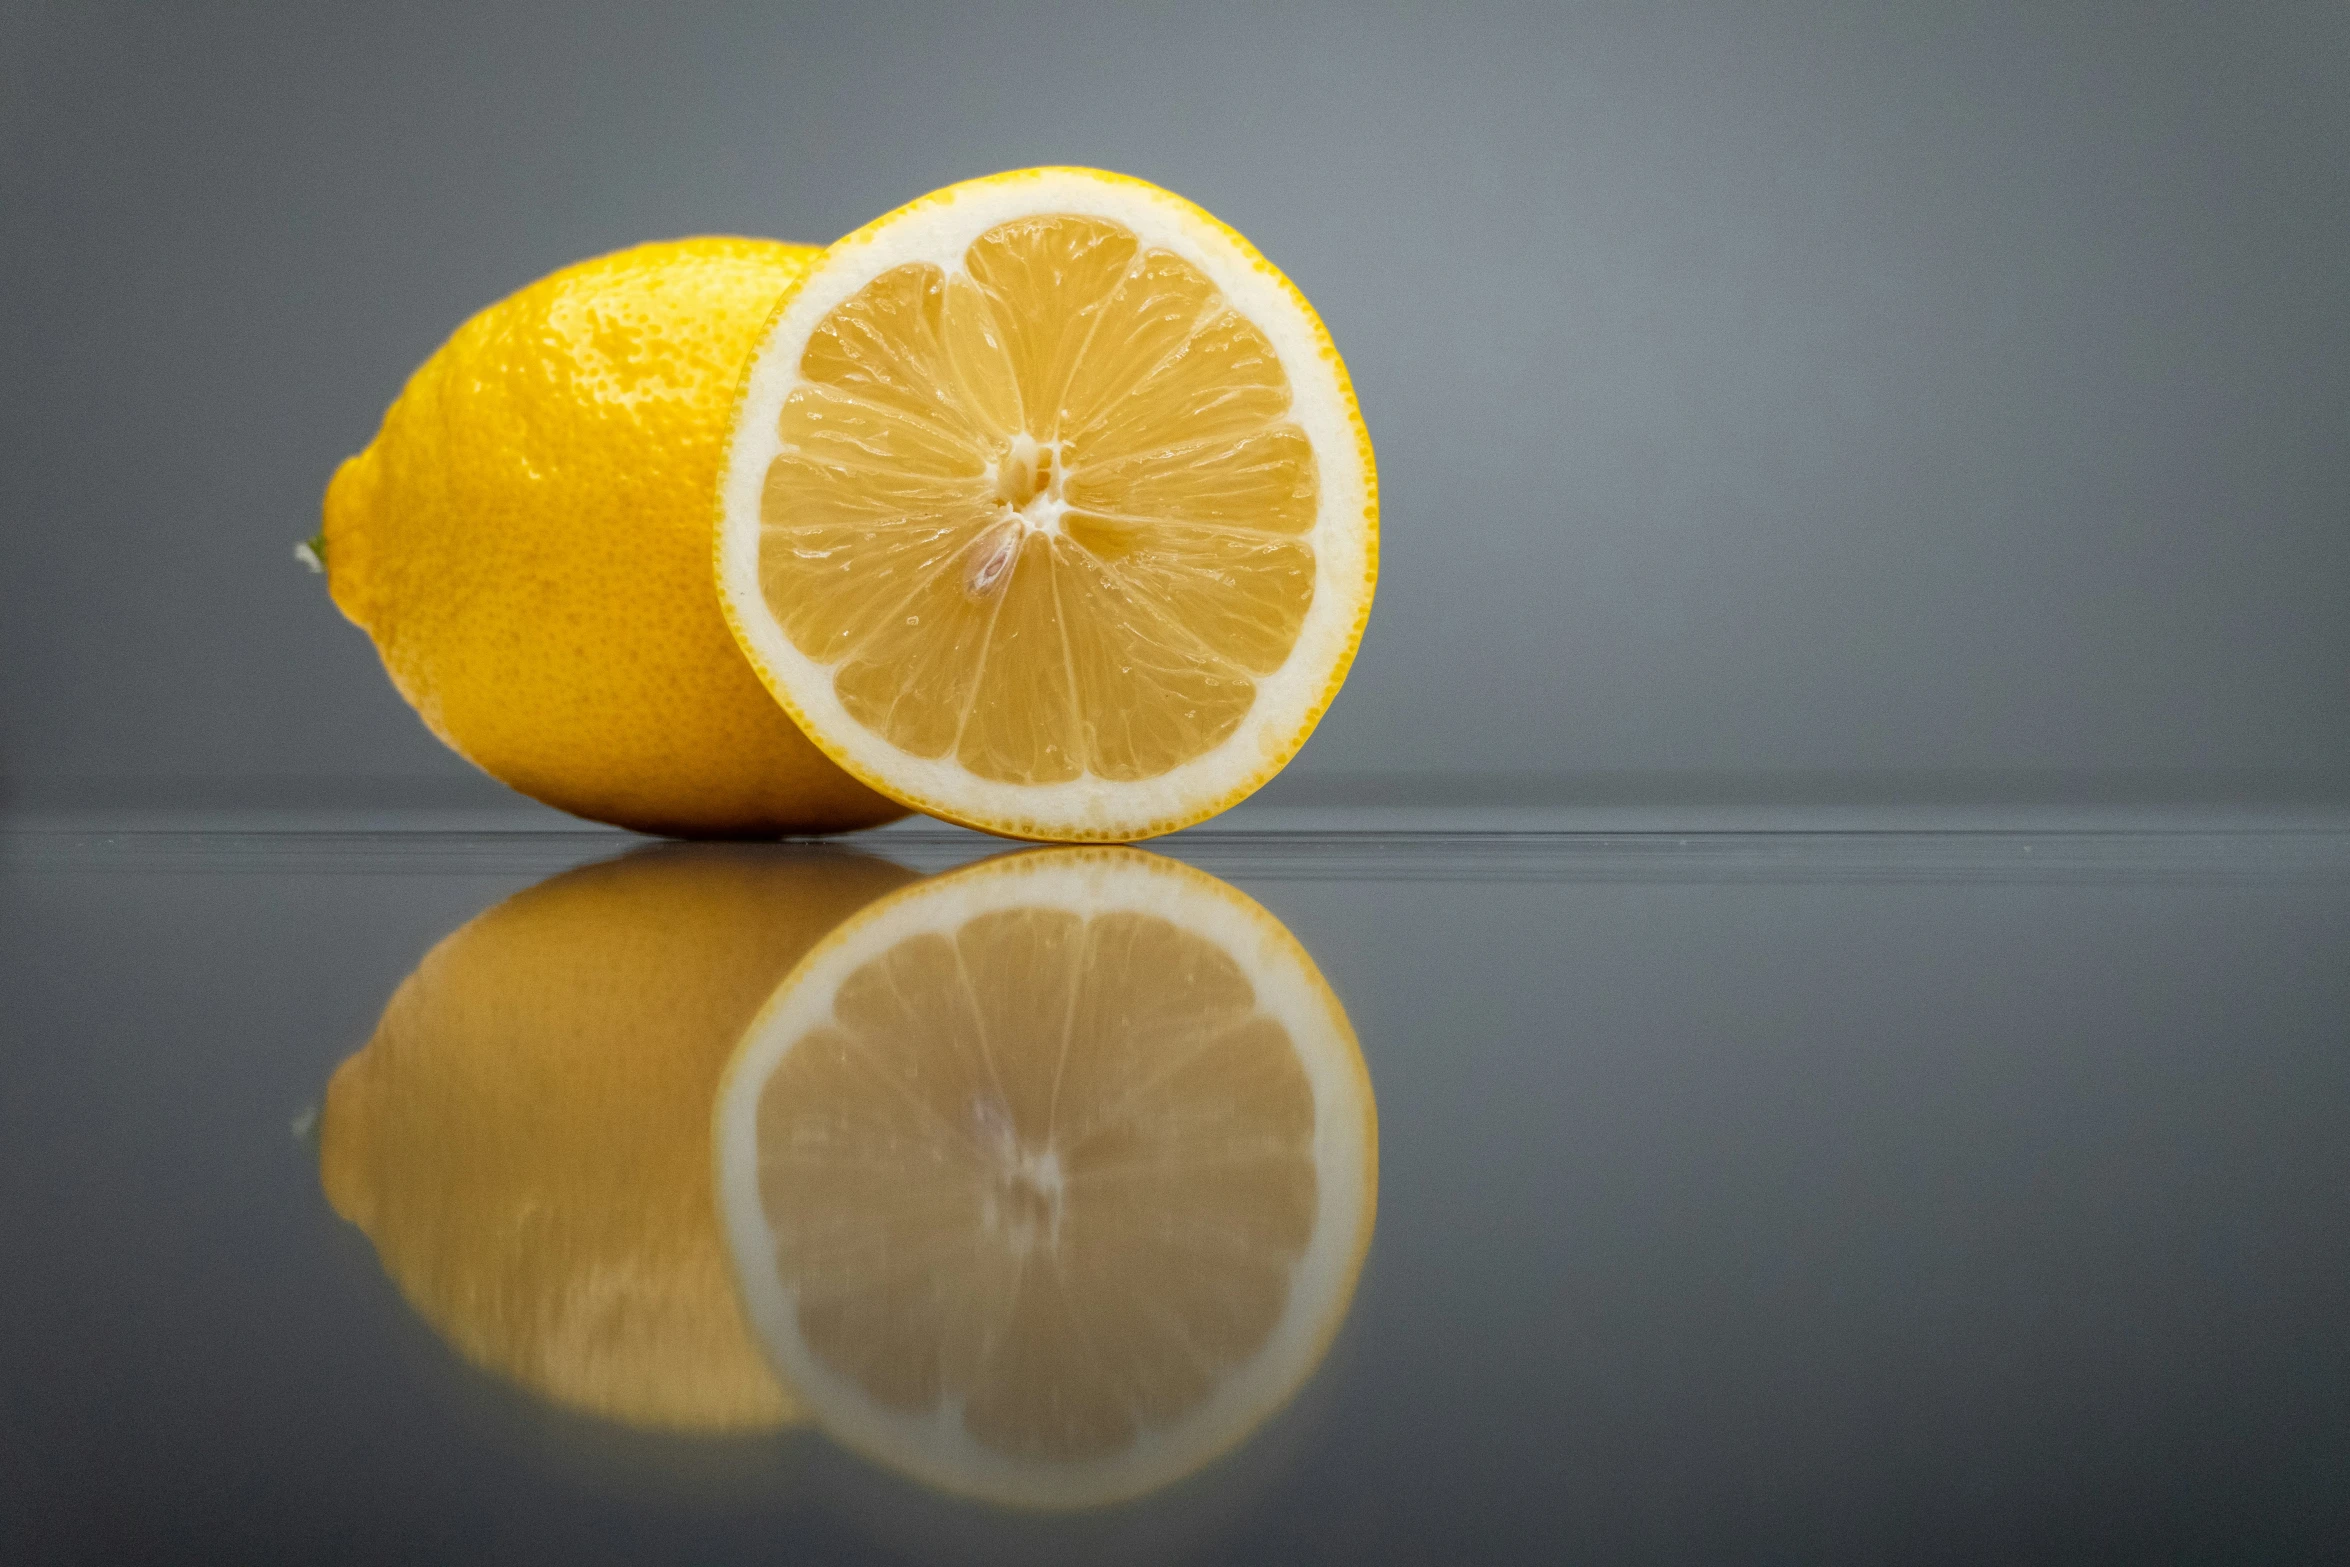 an image of one lemon and the other half sliced